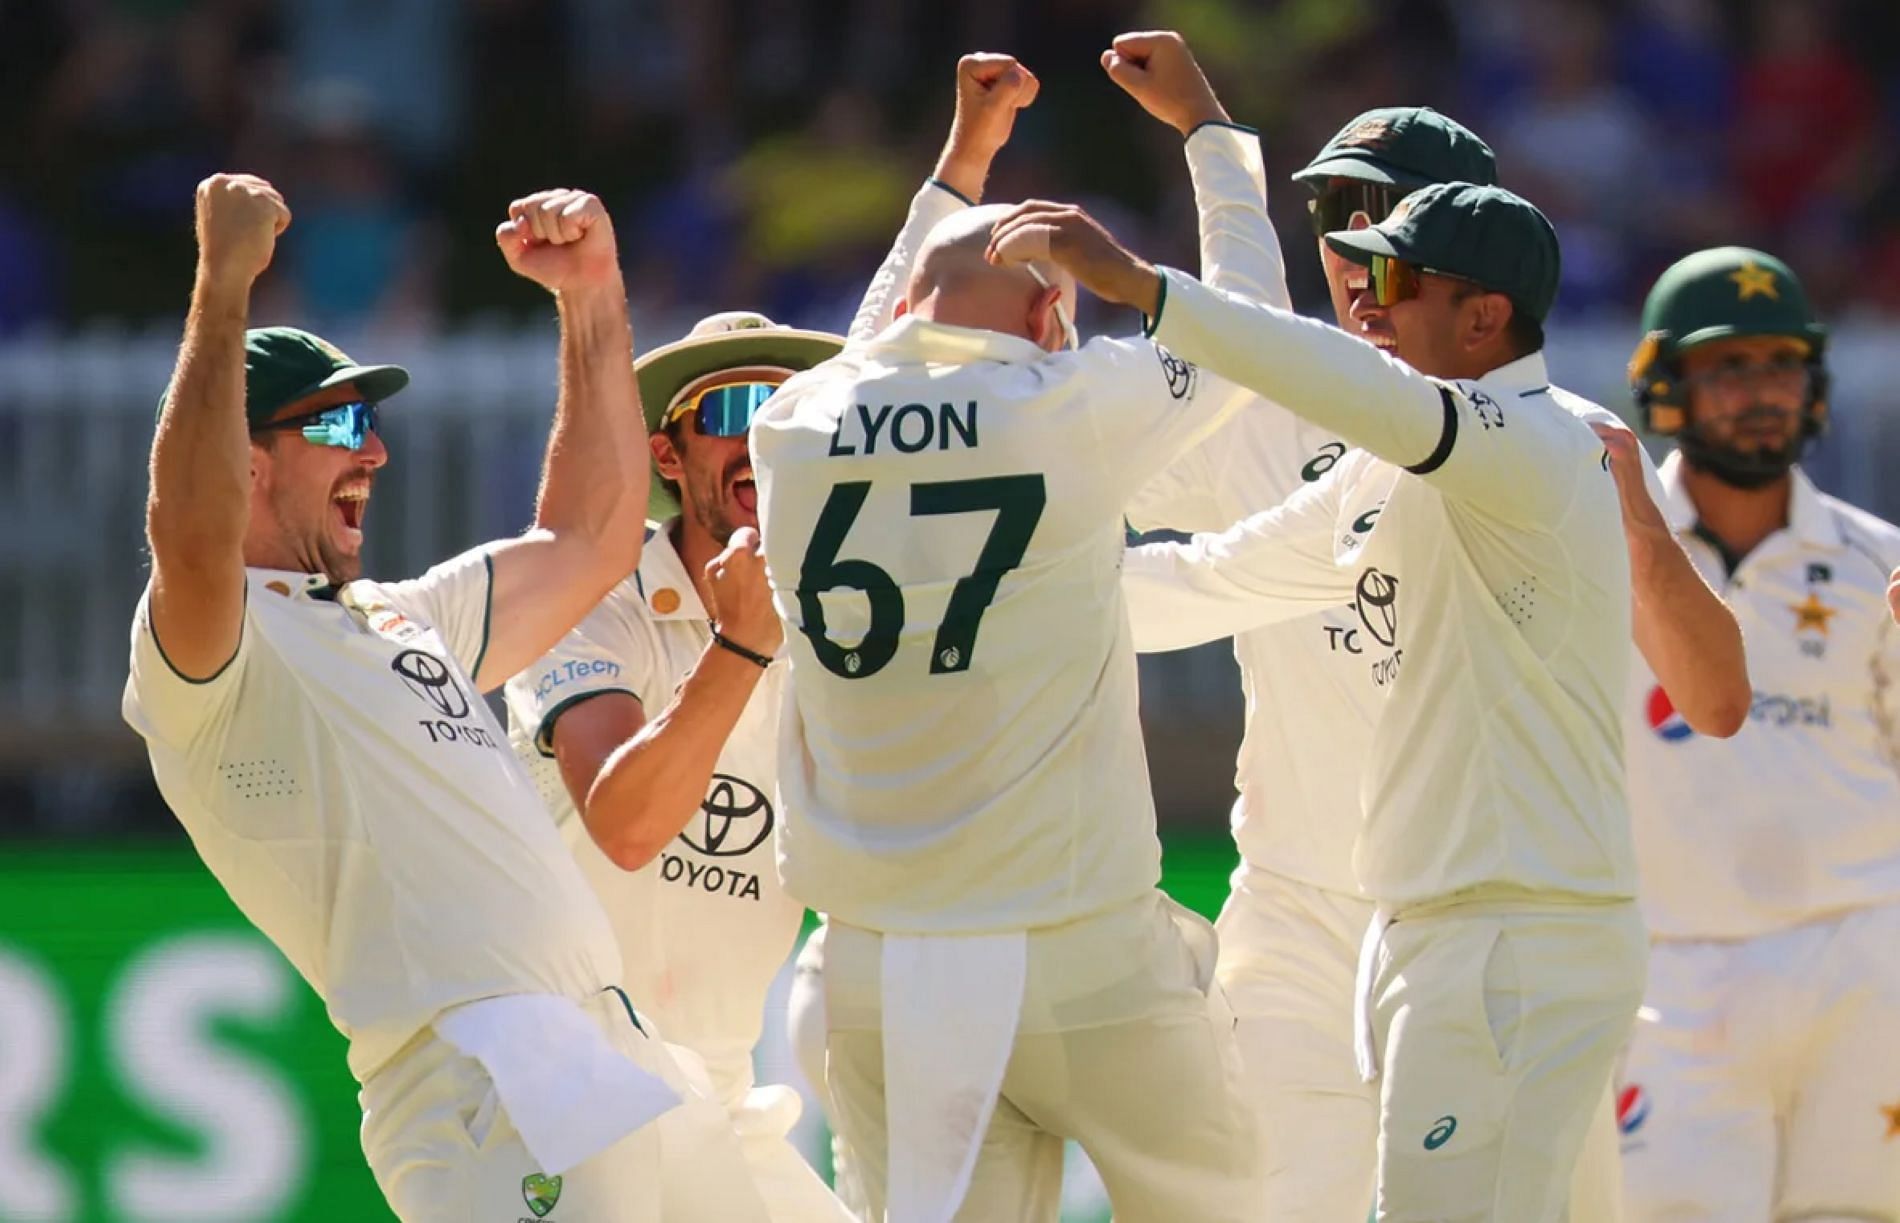 The Aussie bowlers ran through the Pakistan lineup in the final innings.